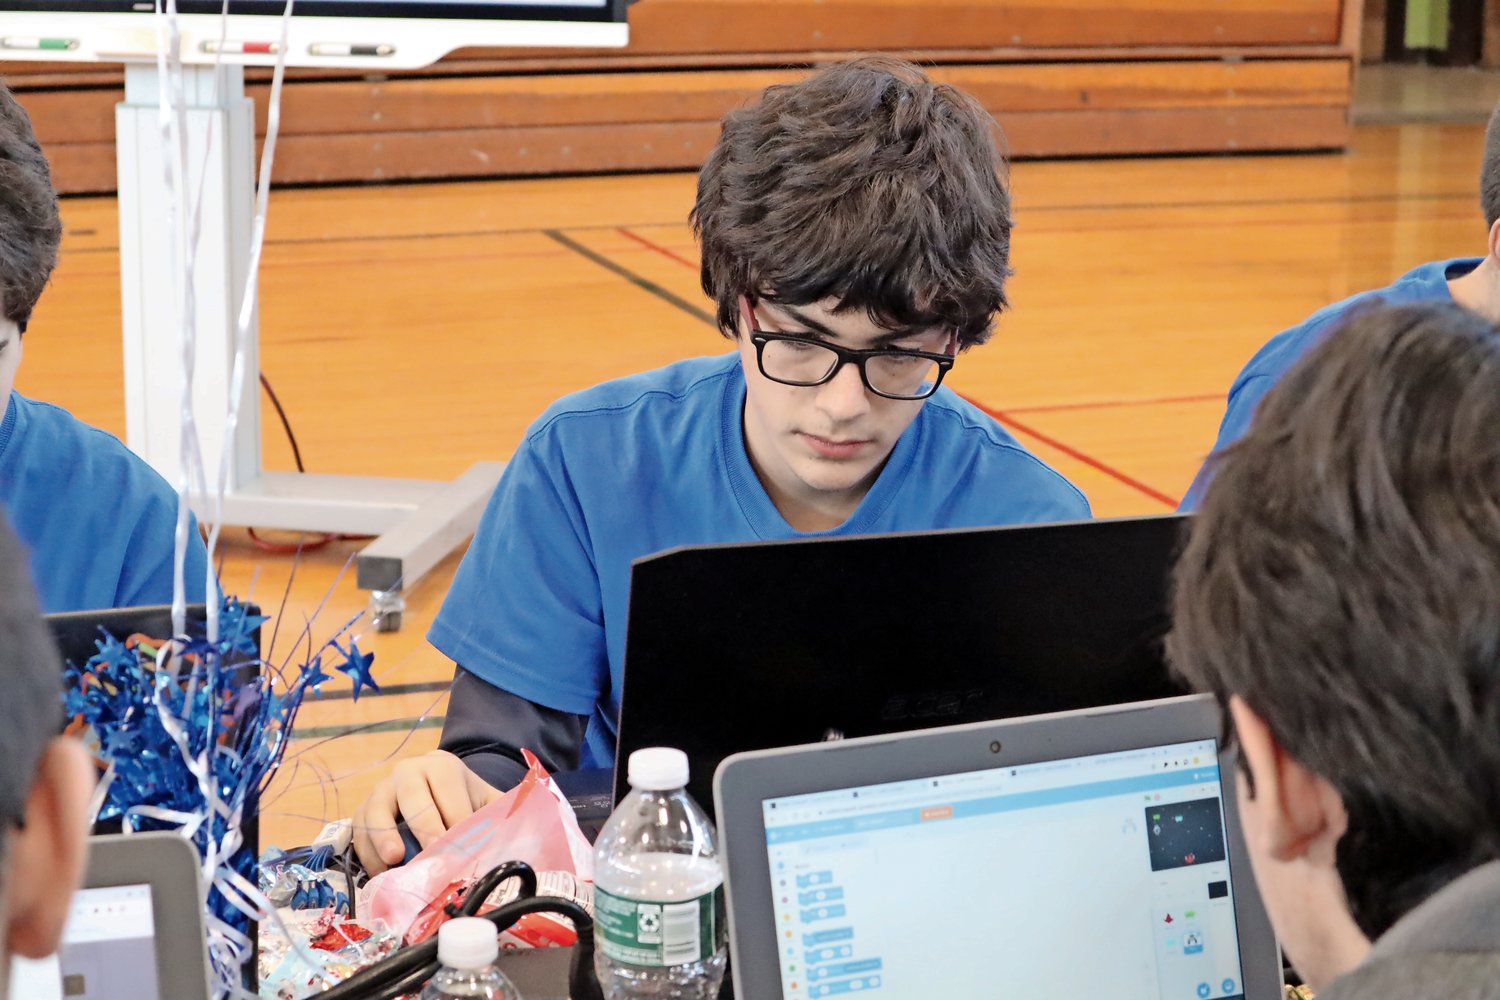 Kenan Yavuz, another member of the Code Crackers, took part in a kidOYO Hackathon last year as a member of the Merrick Avenue Middle School team.